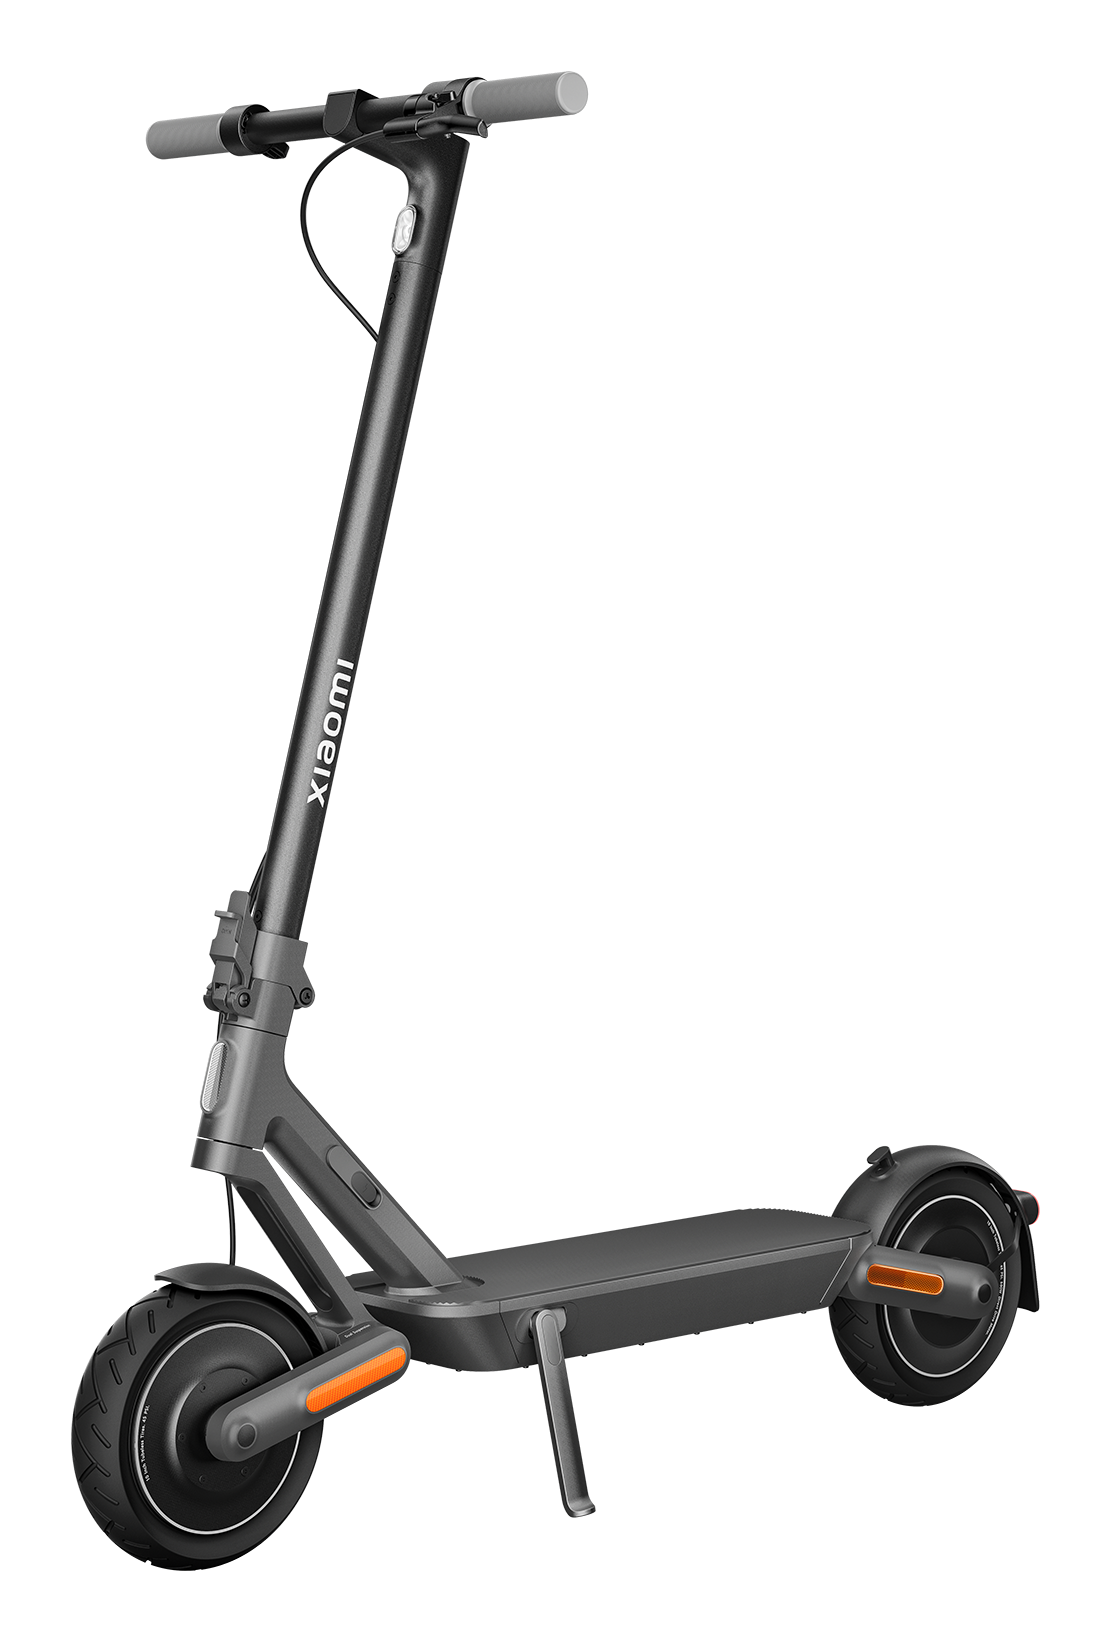 Xiaomi Electric Scooter 4 Ultra: Price, Specification, and More